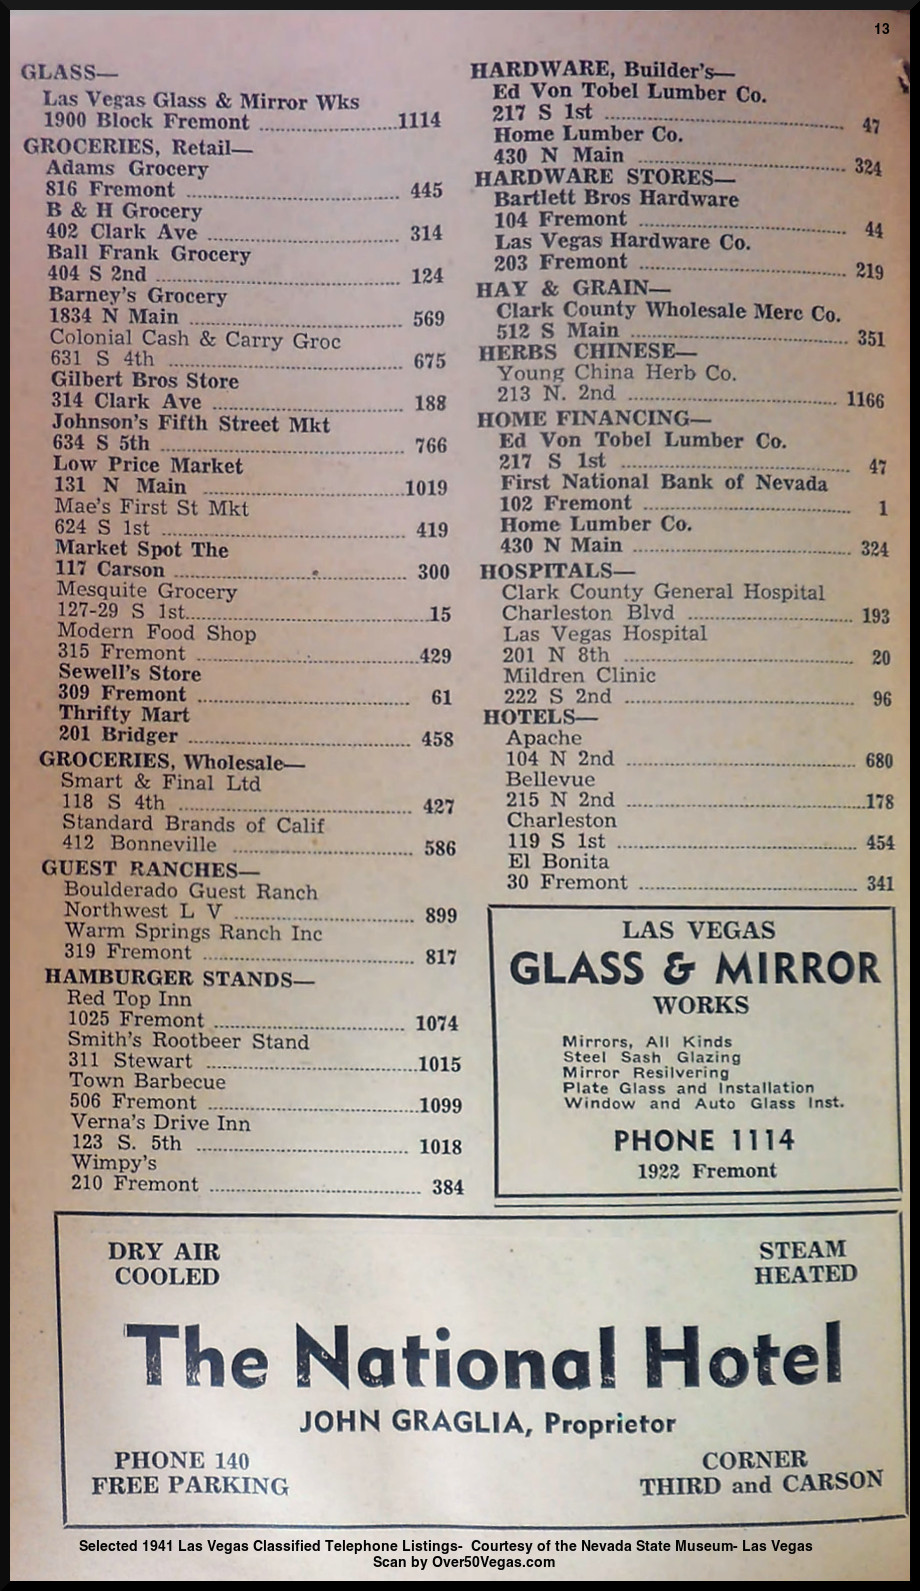 Selected 1941 Las Vegas Classified Telephone Listings-  Courtesy of the Nevada State Museum- Las Vegas         
Scan by Over50Vegas.com